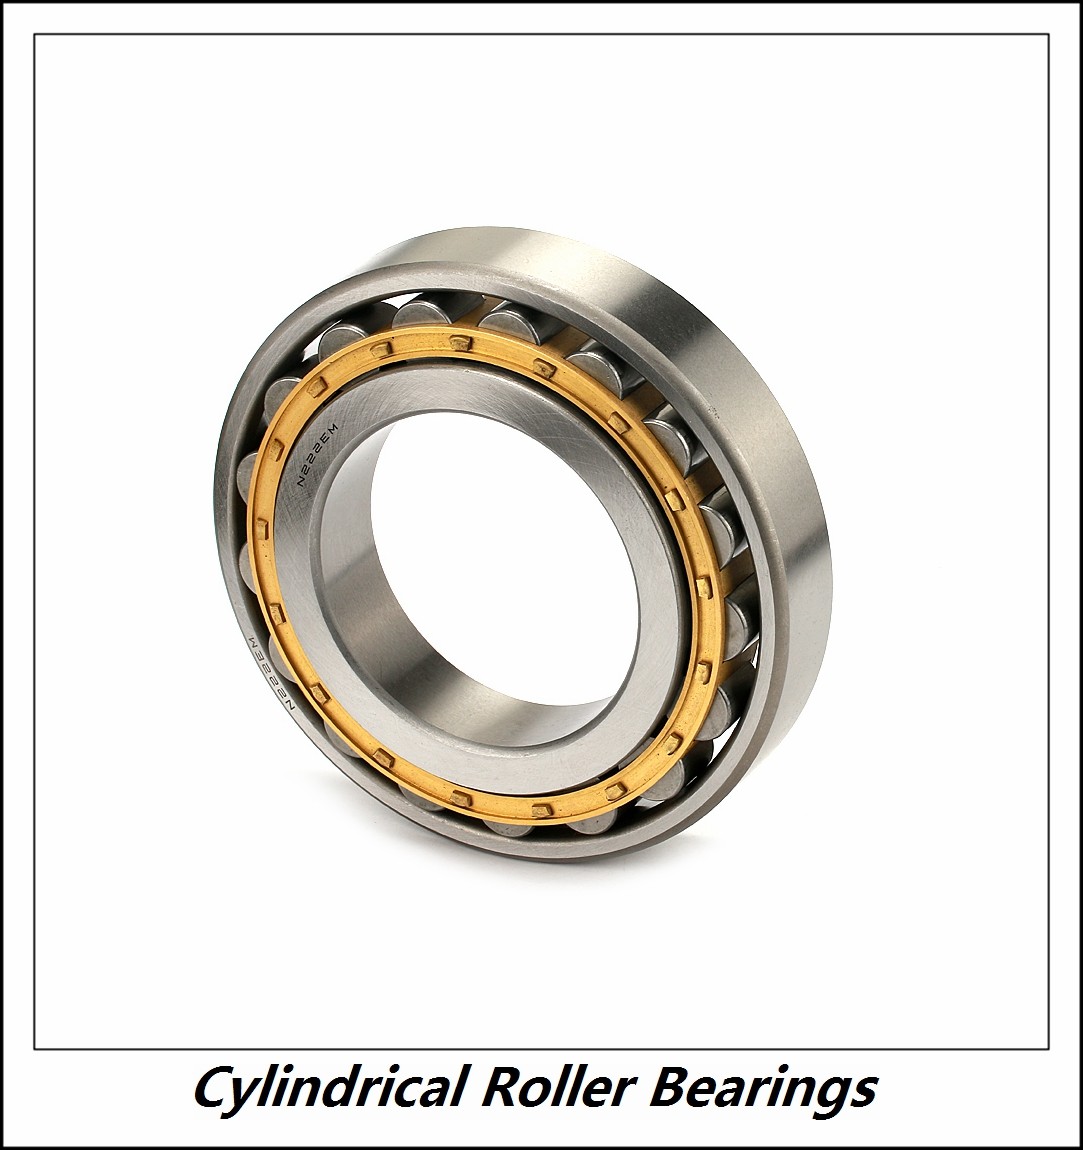 1.375 Inch | 34.925 Millimeter x 2 Inch | 50.8 Millimeter x 2 Inch | 50.8 Millimeter  CONSOLIDATED BEARING 95832  Cylindrical Roller Bearings